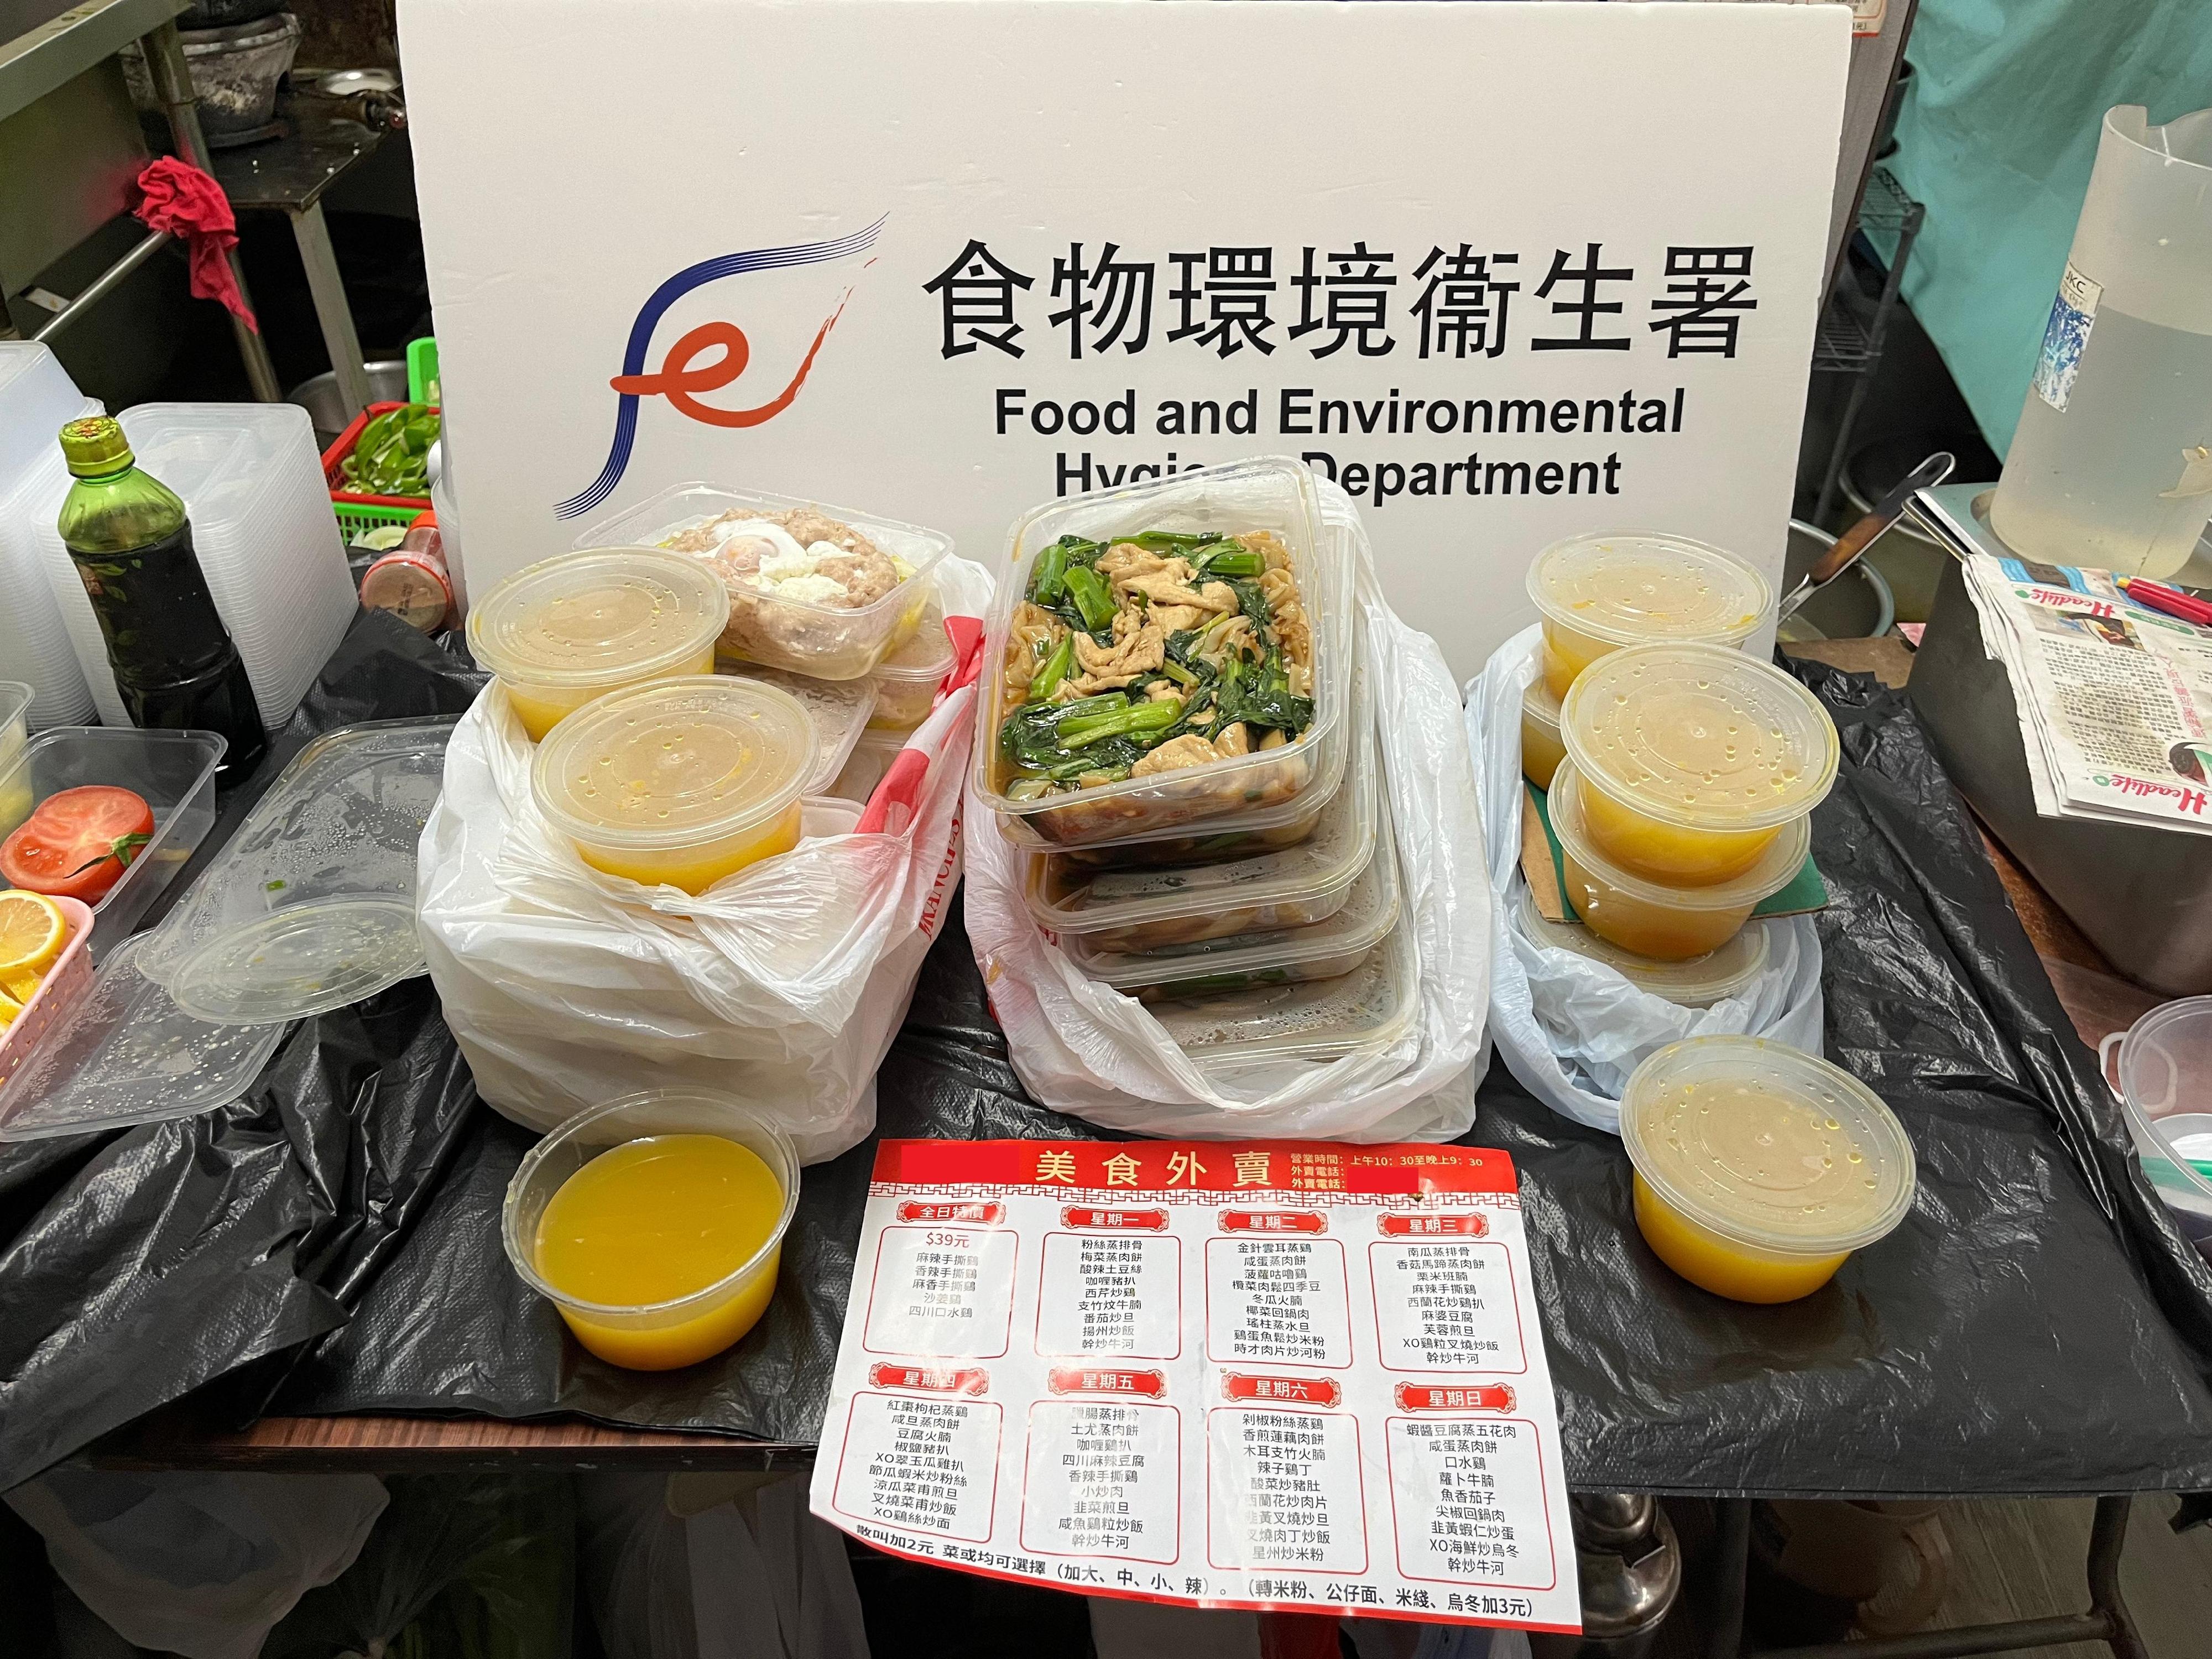 The Food and Environmental Hygiene Department raided an unlicensed food factory in Causeway Bay during a blitz operation today (March 19). Photo shows the food seized in the operation.